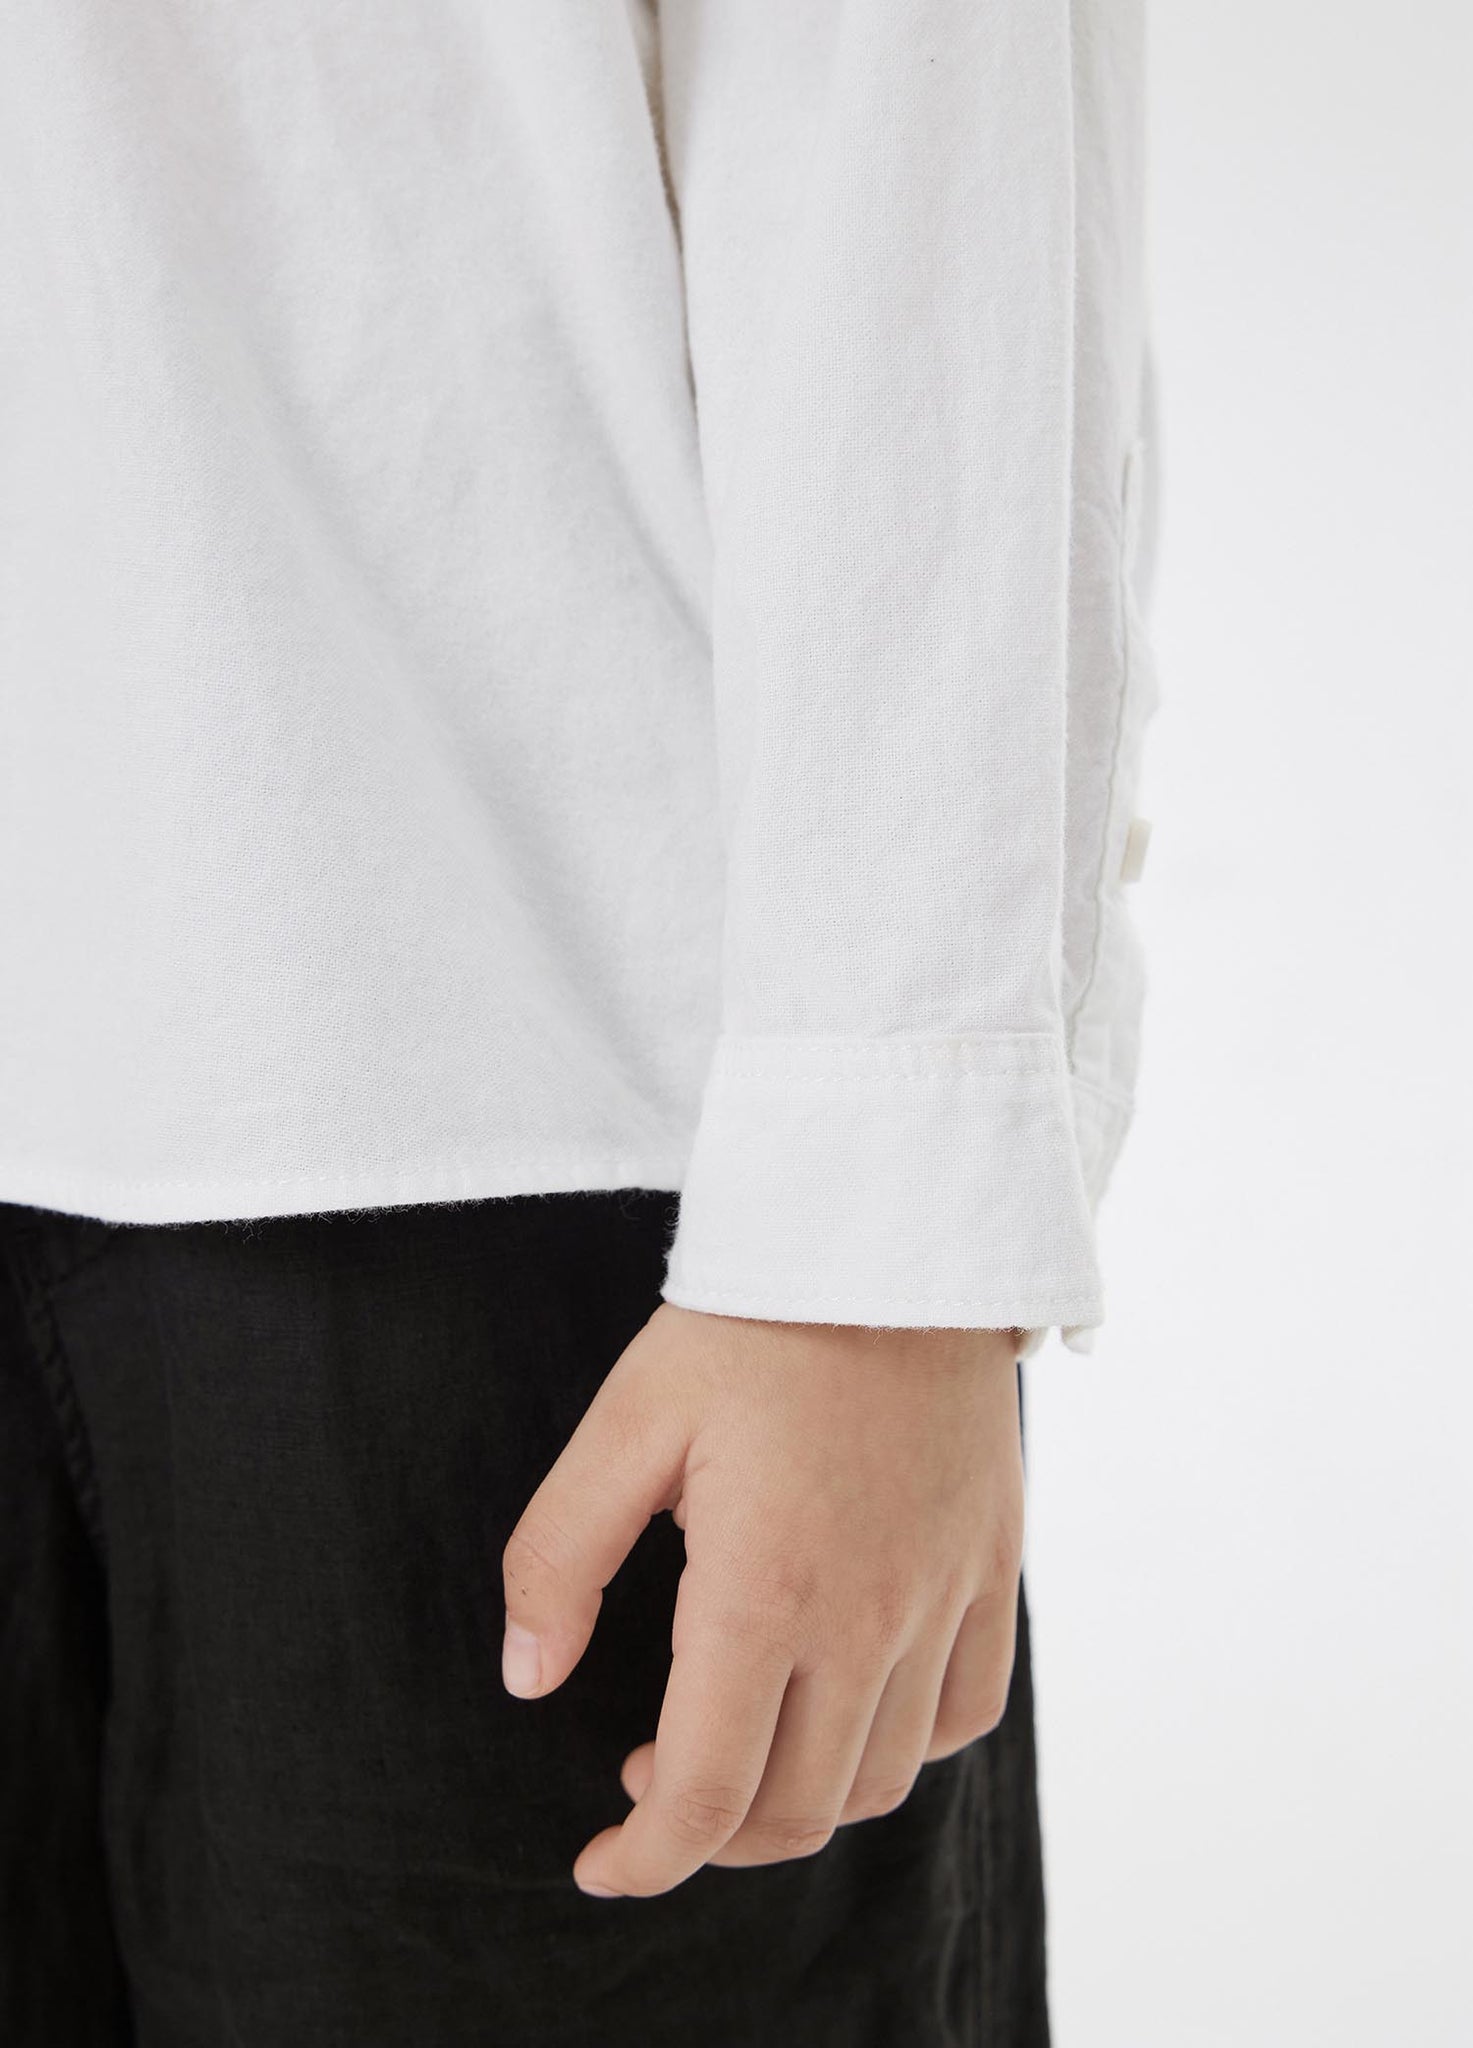 Shirt / jnby by JNBY Embroidery Long Sleeve Shirt